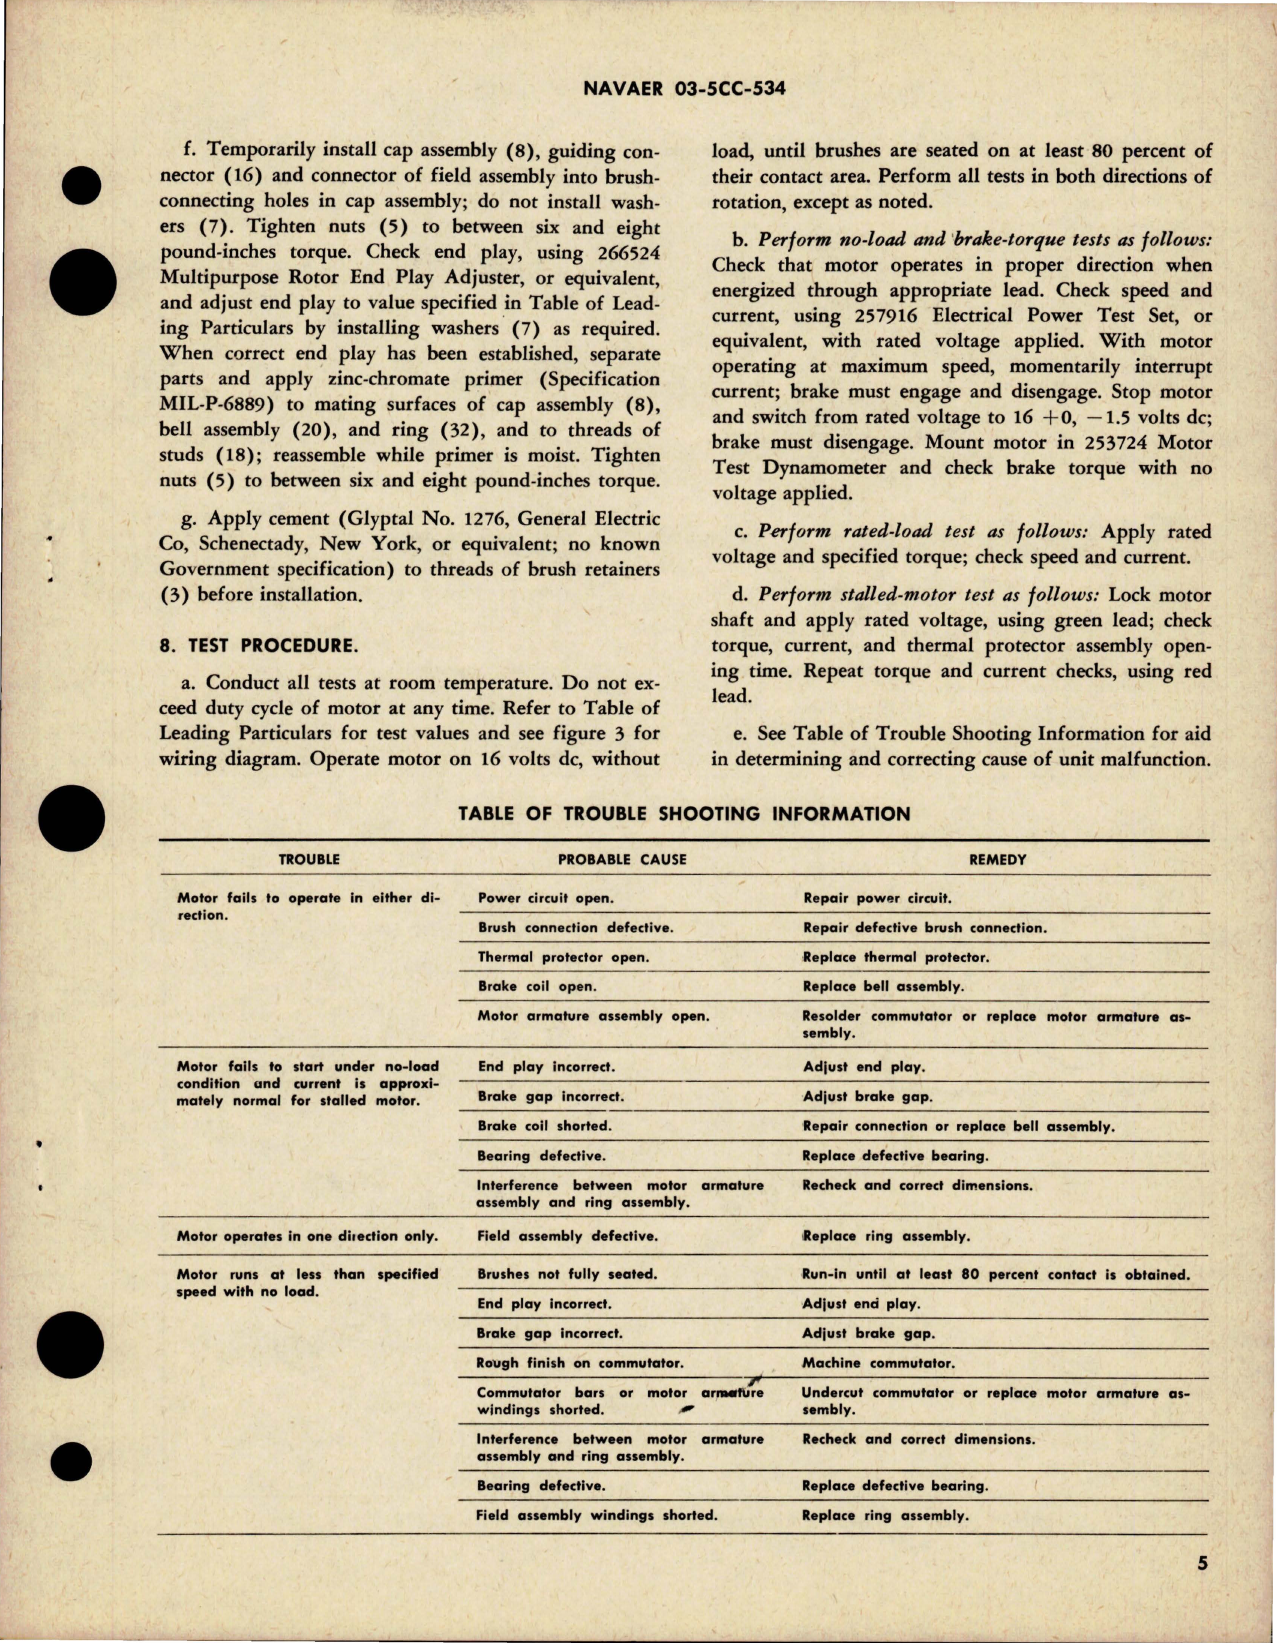 Sample page 5 from AirCorps Library document: Overhaul Instructions with Parts for Direct Current Motor - 0.035 HP - Part 32718 - Model DCM15-89-1 